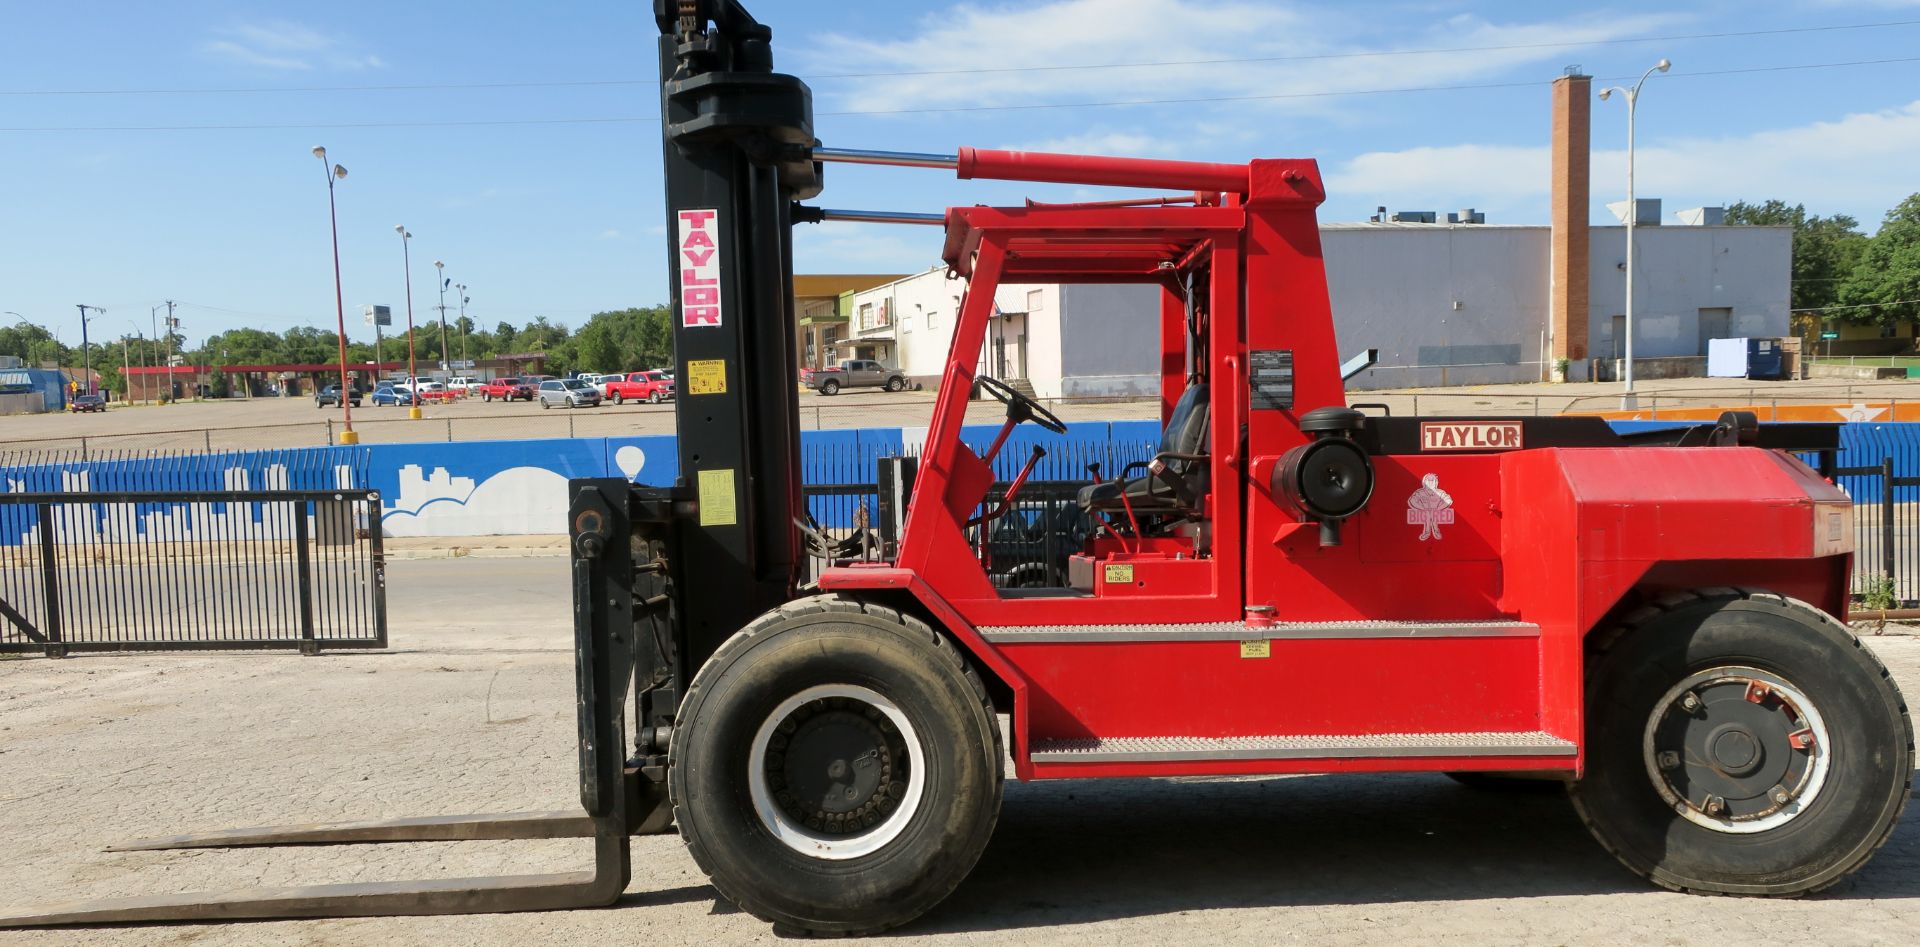 Taylor TE300M 30,000 LB Capacity Heavy-Duty Forklift Truck, 326 hours - Image 2 of 3